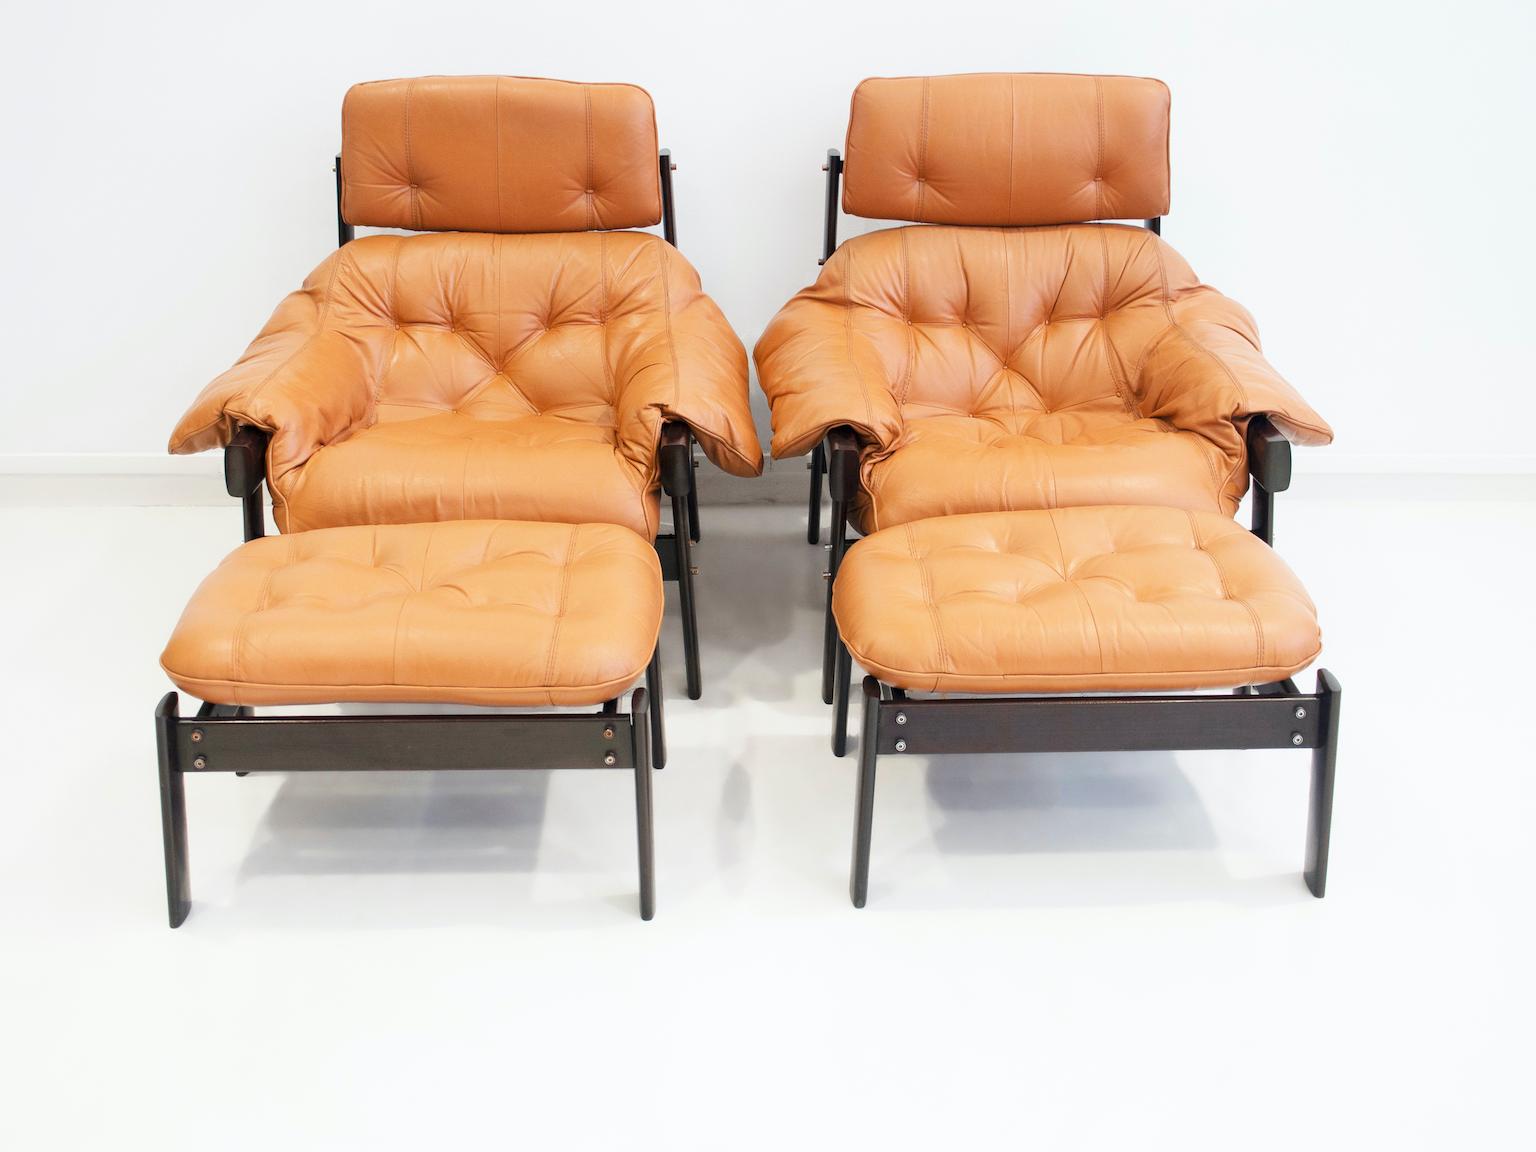 Brazilian Pair of Percival Lafer Leather Lounge Chairs with Footrests